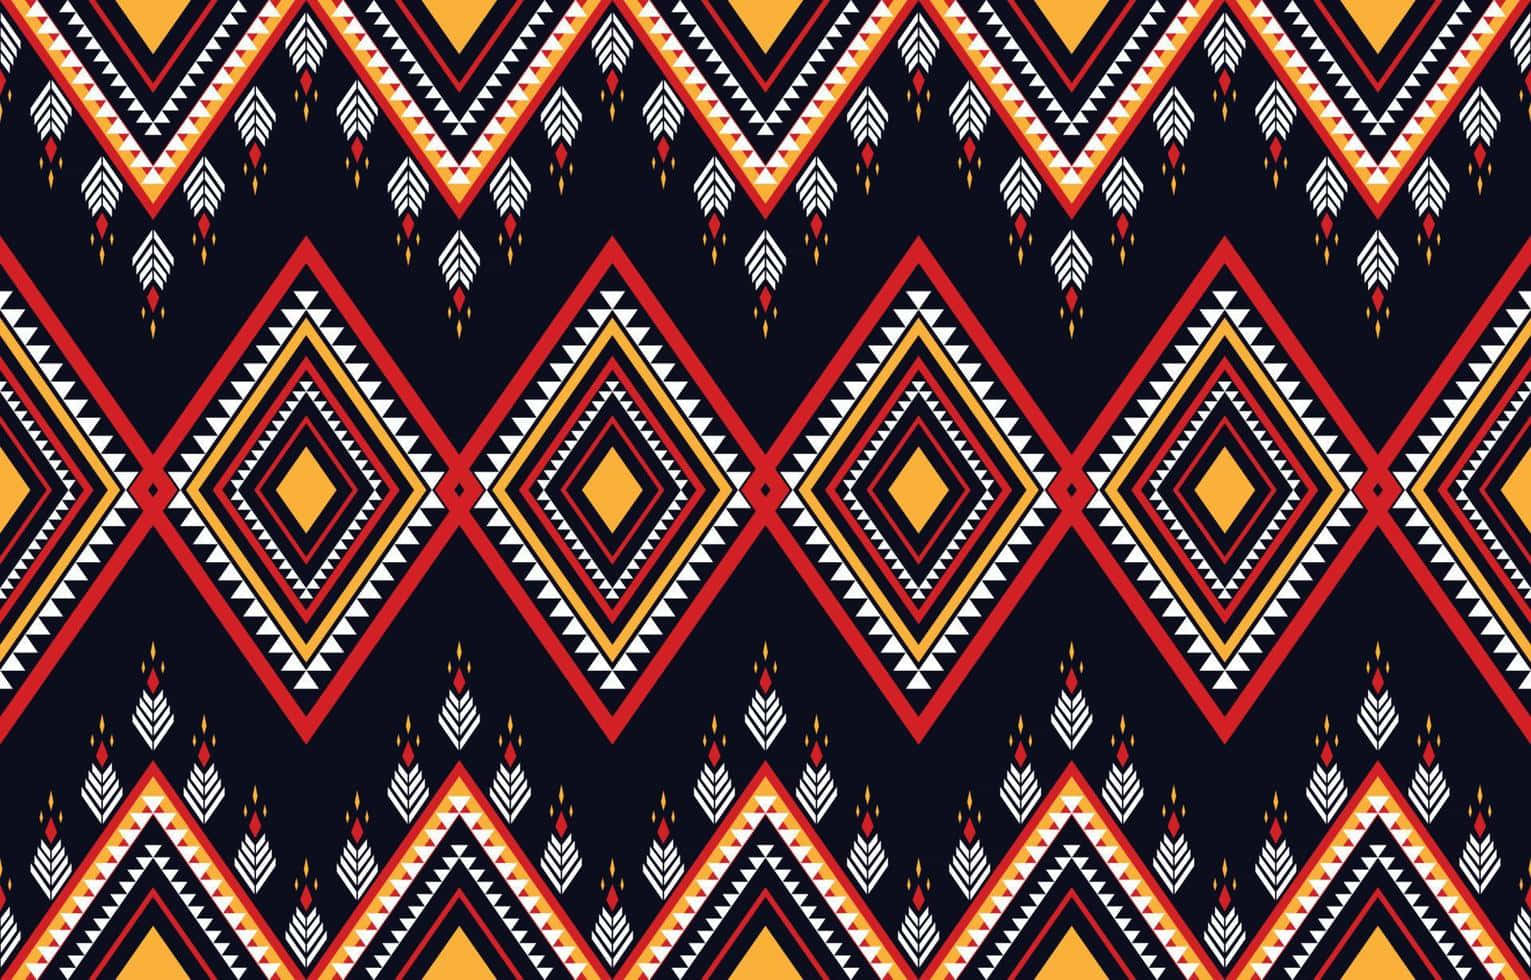 [100+] Indigenous Backgrounds | Wallpapers.com